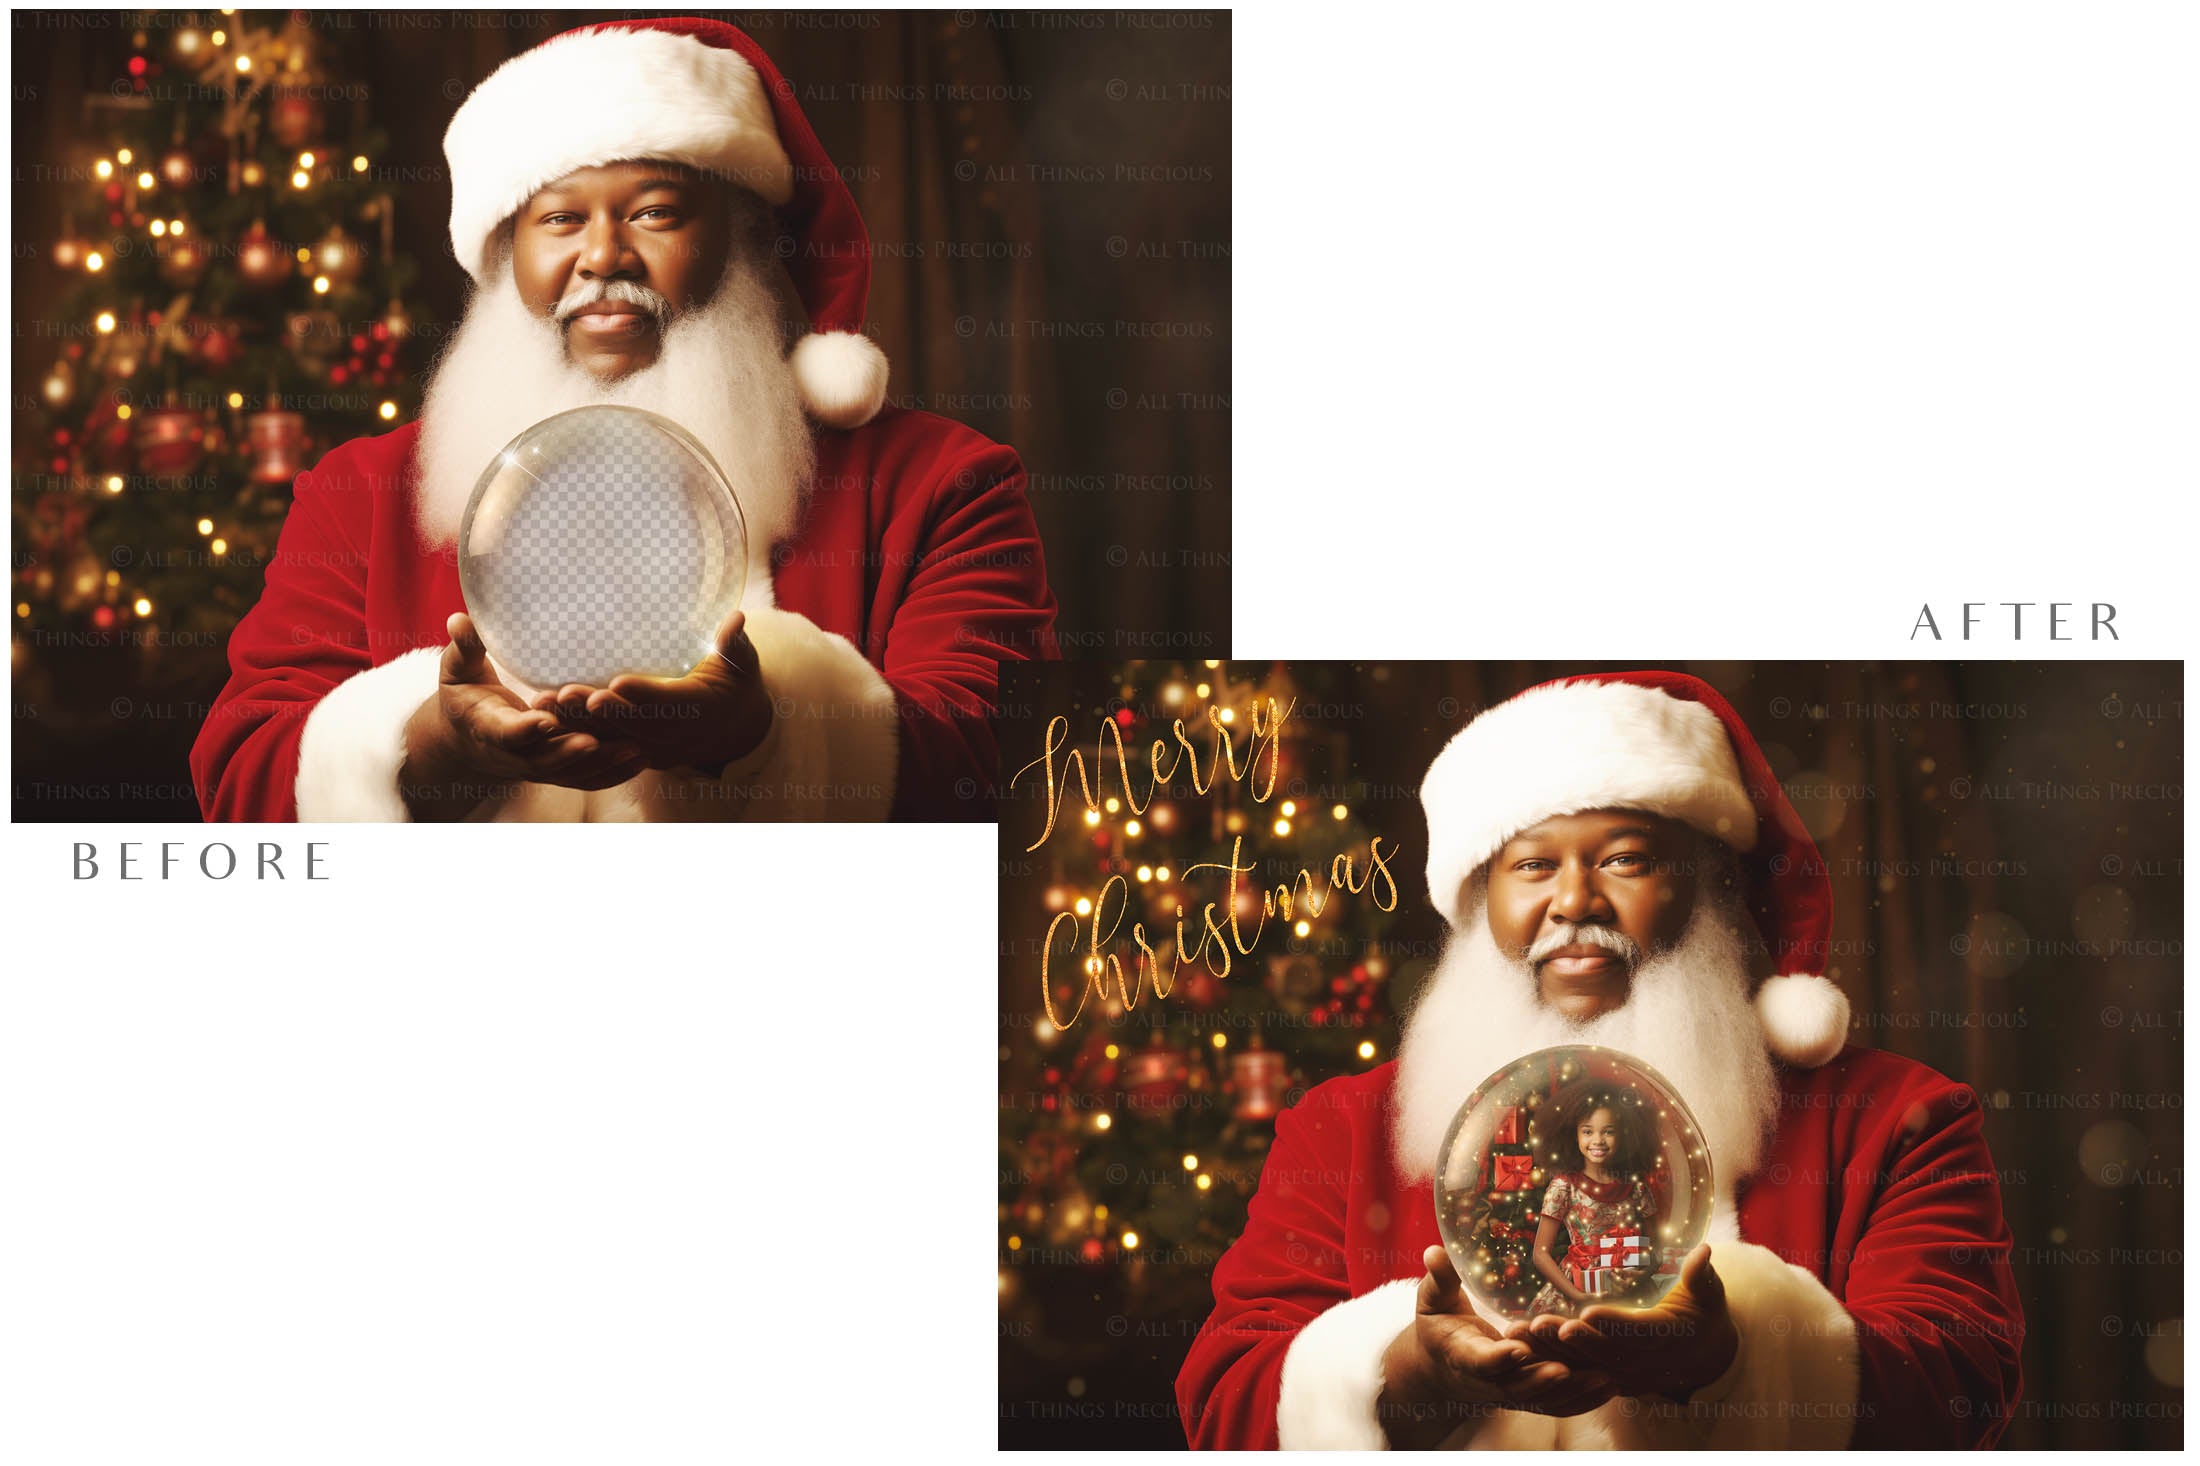 Digital Santa Globe Background, with Png overlays & PSD Template. The globe is transparent, perfect to add images and retain the glass effect. 6000 x 4000, 300dpi. Png Included. Use for Christmas edits, Photography, Card Crafts, Scrapbooking. Xmas Backdrops. African American Black Santa holding a glass ball.